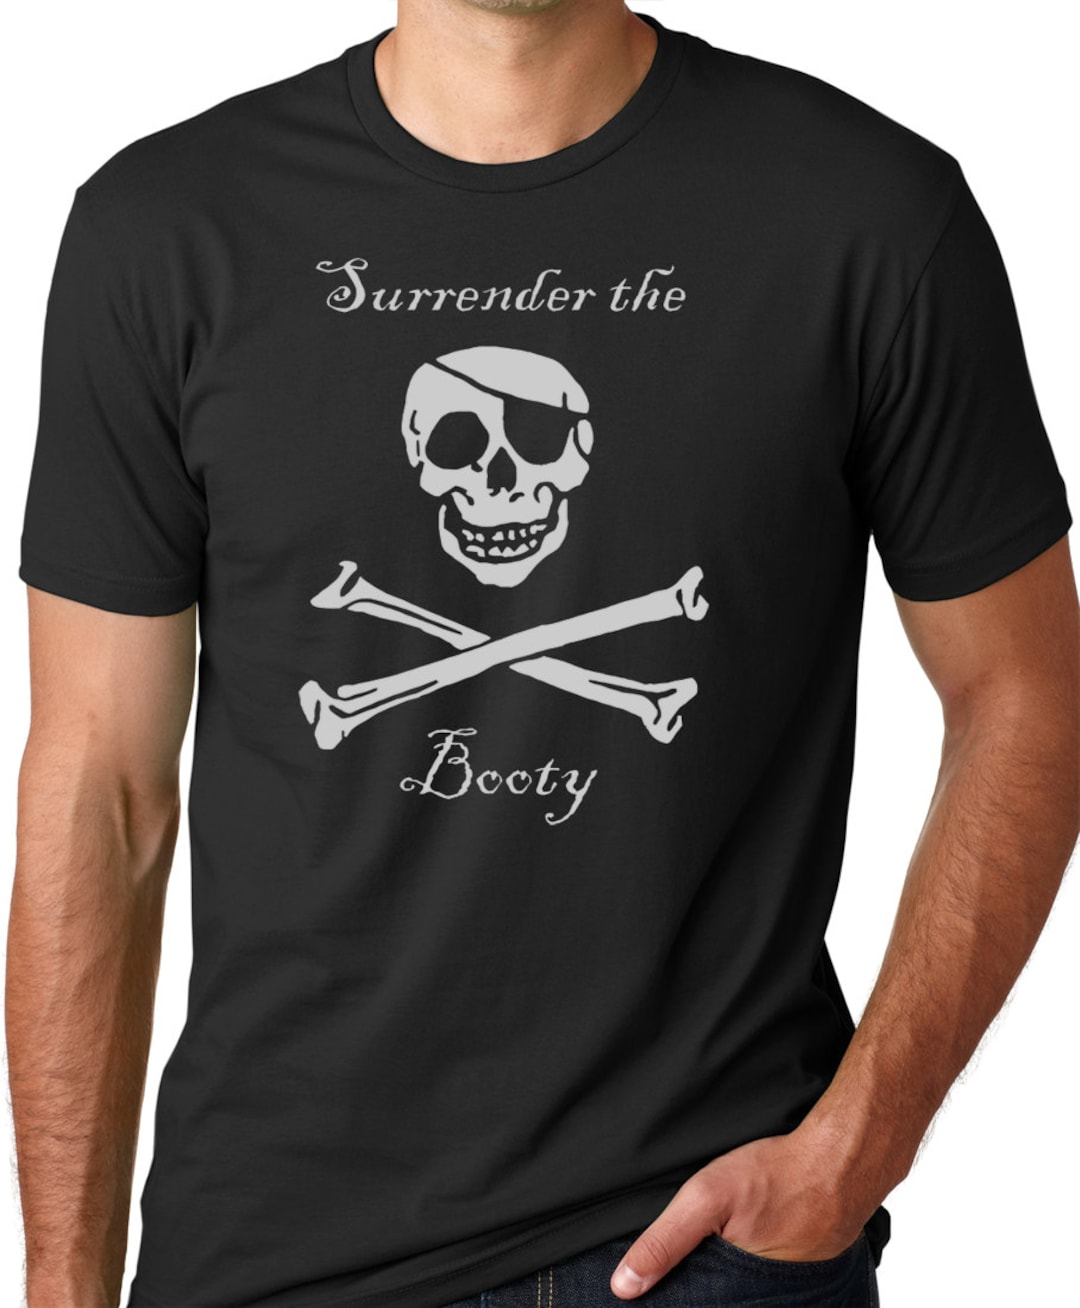 Surrender the Booty Funny Pirate T-shirt Etsy